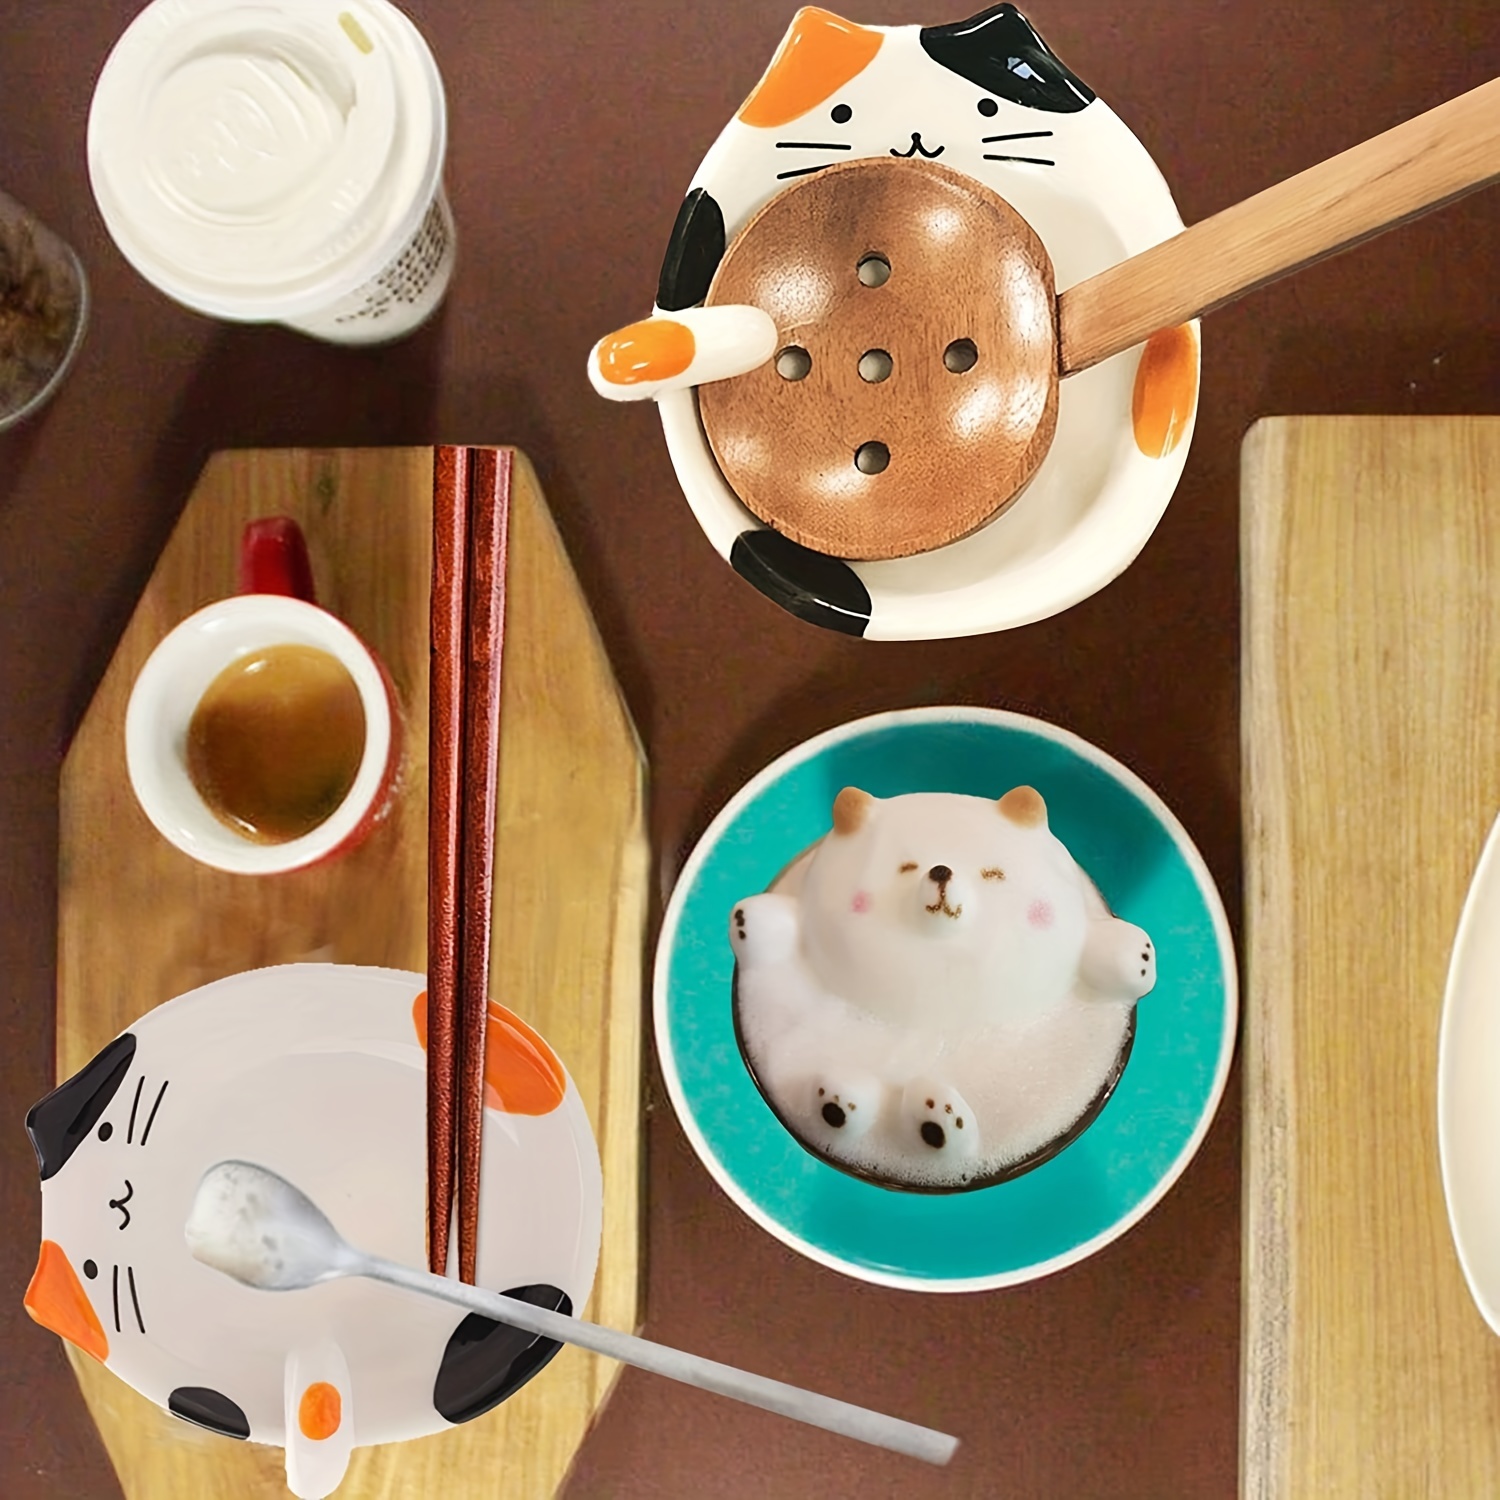 Our handmade ceramic striped cat spoon rest is fun functional art !